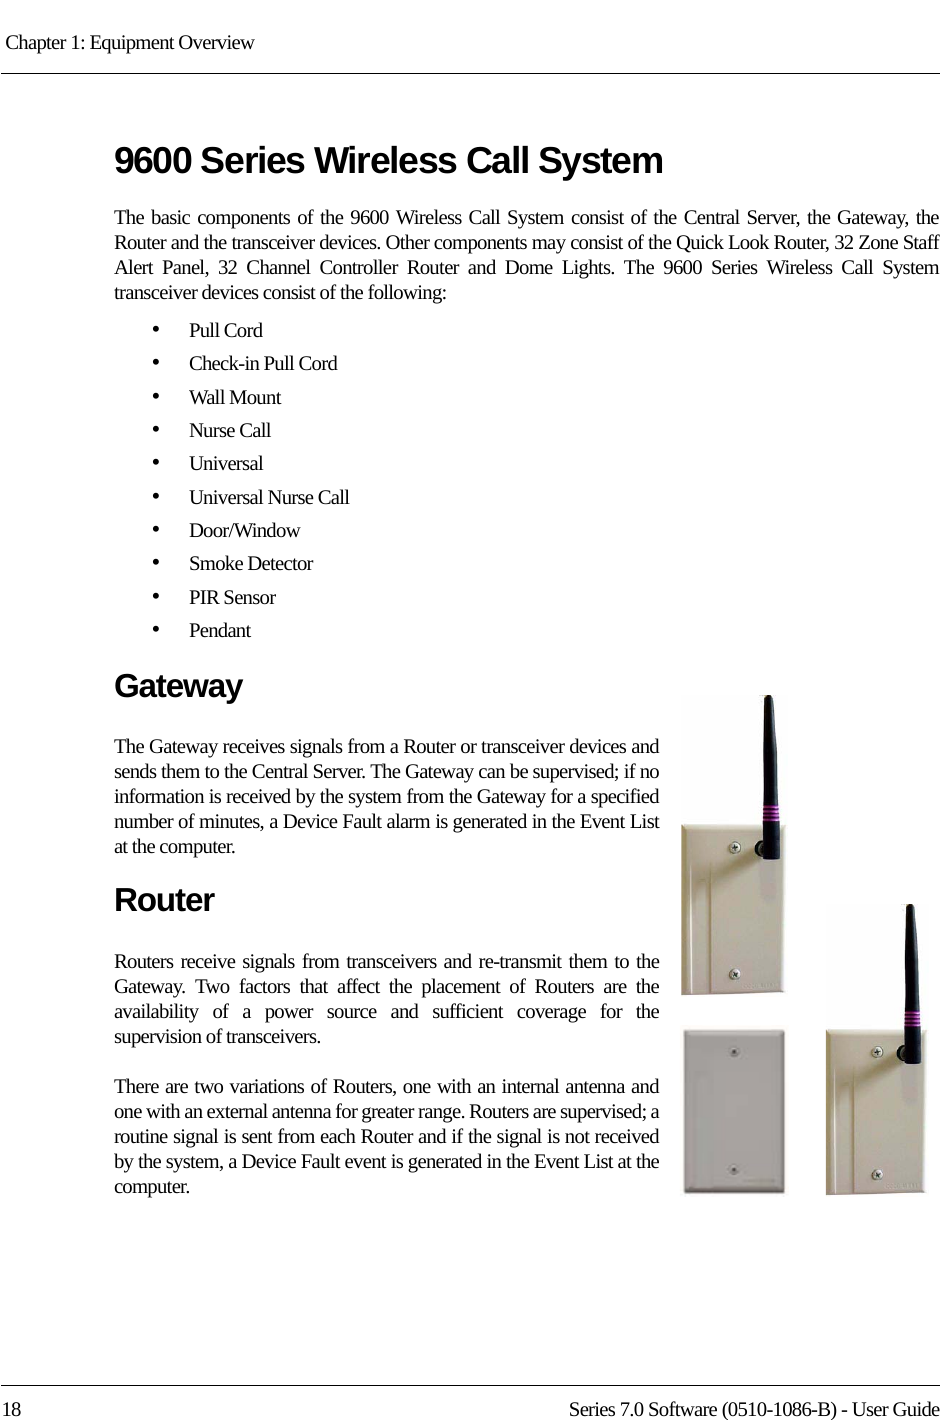 Chapter 1: Equipment Overview 18 Series 7.0 Software (0510-1086-B) - User Guide9600 Series Wireless Call SystemThe basic components of the 9600 Wireless Call System consist of the Central Server, the Gateway, the Router and the transceiver devices. Other components may consist of the Quick Look Router, 32 Zone Staff Alert Panel, 32 Channel Controller Router and Dome Lights. The 9600 Series Wireless Call System transceiver devices consist of the following:•Pull Cord•Check-in Pull Cord•Wall Mount•Nurse Call•Universal •Universal Nurse Call•Door/Window •Smoke Detector•PIR Sensor•Pendant GatewayThe Gateway receives signals from a Router or transceiver devices and sends them to the Central Server. The Gateway can be supervised; if no information is received by the system from the Gateway for a specified number of minutes, a Device Fault alarm is generated in the Event List at the computer.RouterRouters receive signals from transceivers and re-transmit them to the Gateway. Two factors that affect the placement of Routers are the availability of a power source and sufficient coverage for the supervision of transceivers. There are two variations of Routers, one with an internal antenna and one with an external antenna for greater range. Routers are supervised; a routine signal is sent from each Router and if the signal is not received by the system, a Device Fault event is generated in the Event List at the computer. 